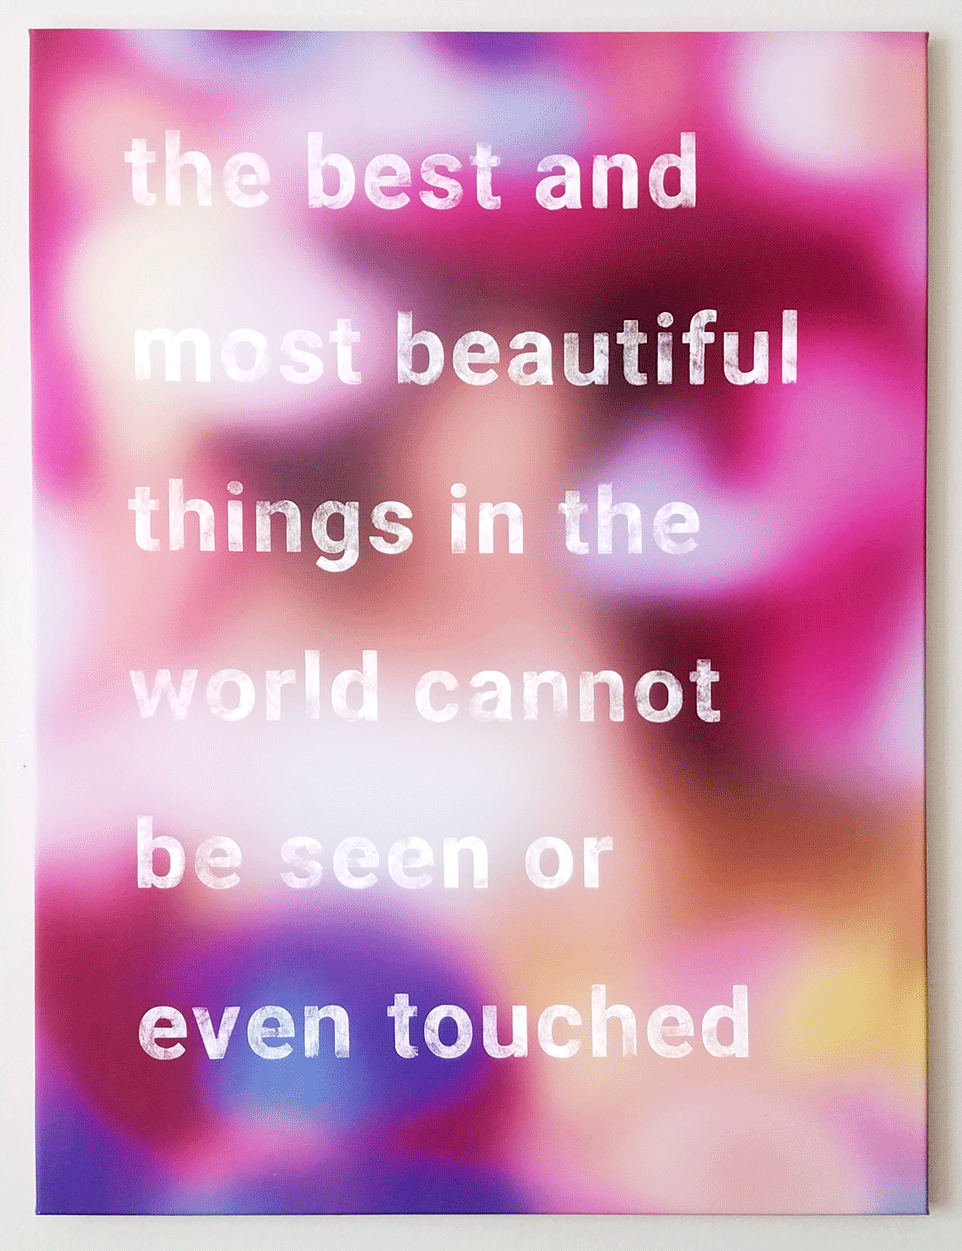 a multi-colored rectange with the text, "the best and most beautiful things in the world cannot be seen or even touched" that flashes on and off